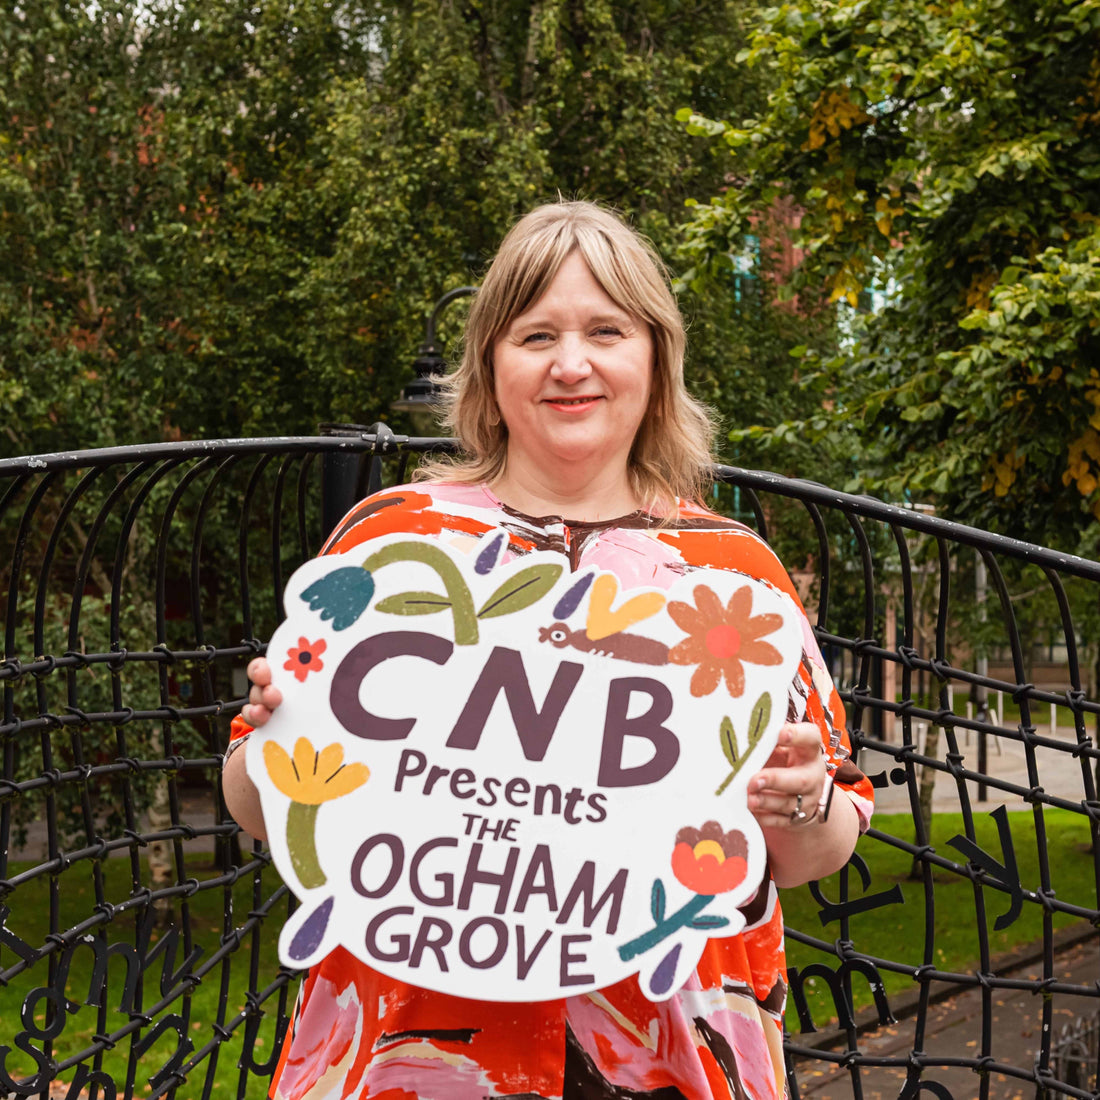 AD: The Countdown Is On To CNB21 Presents The Ogham Grove